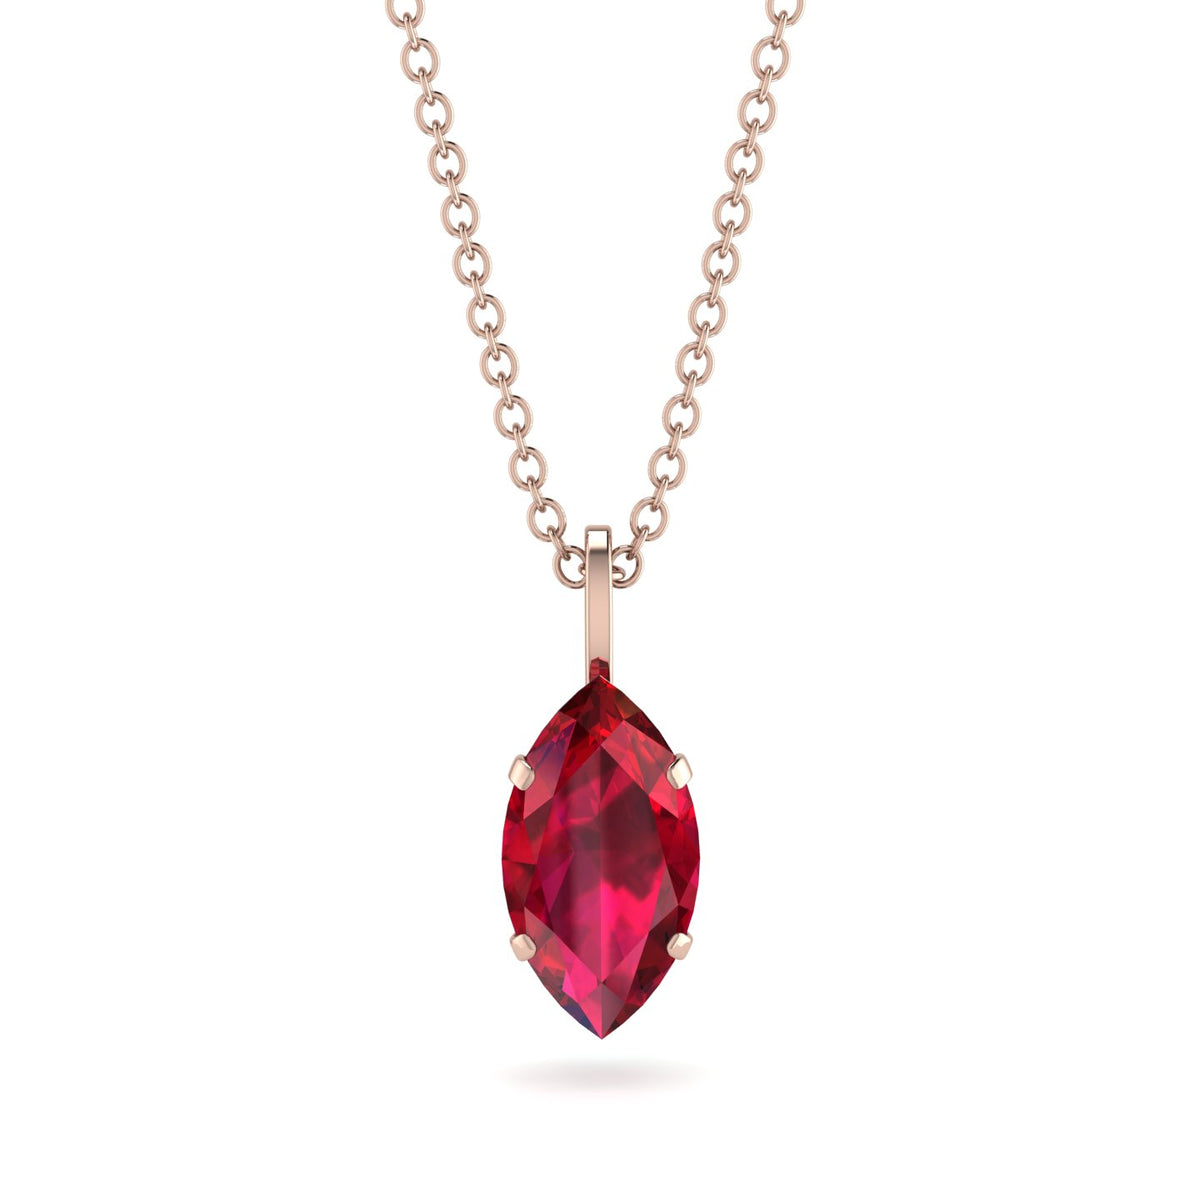 Adorable Antique Ruby Teardrop Necklace - South India Jewels